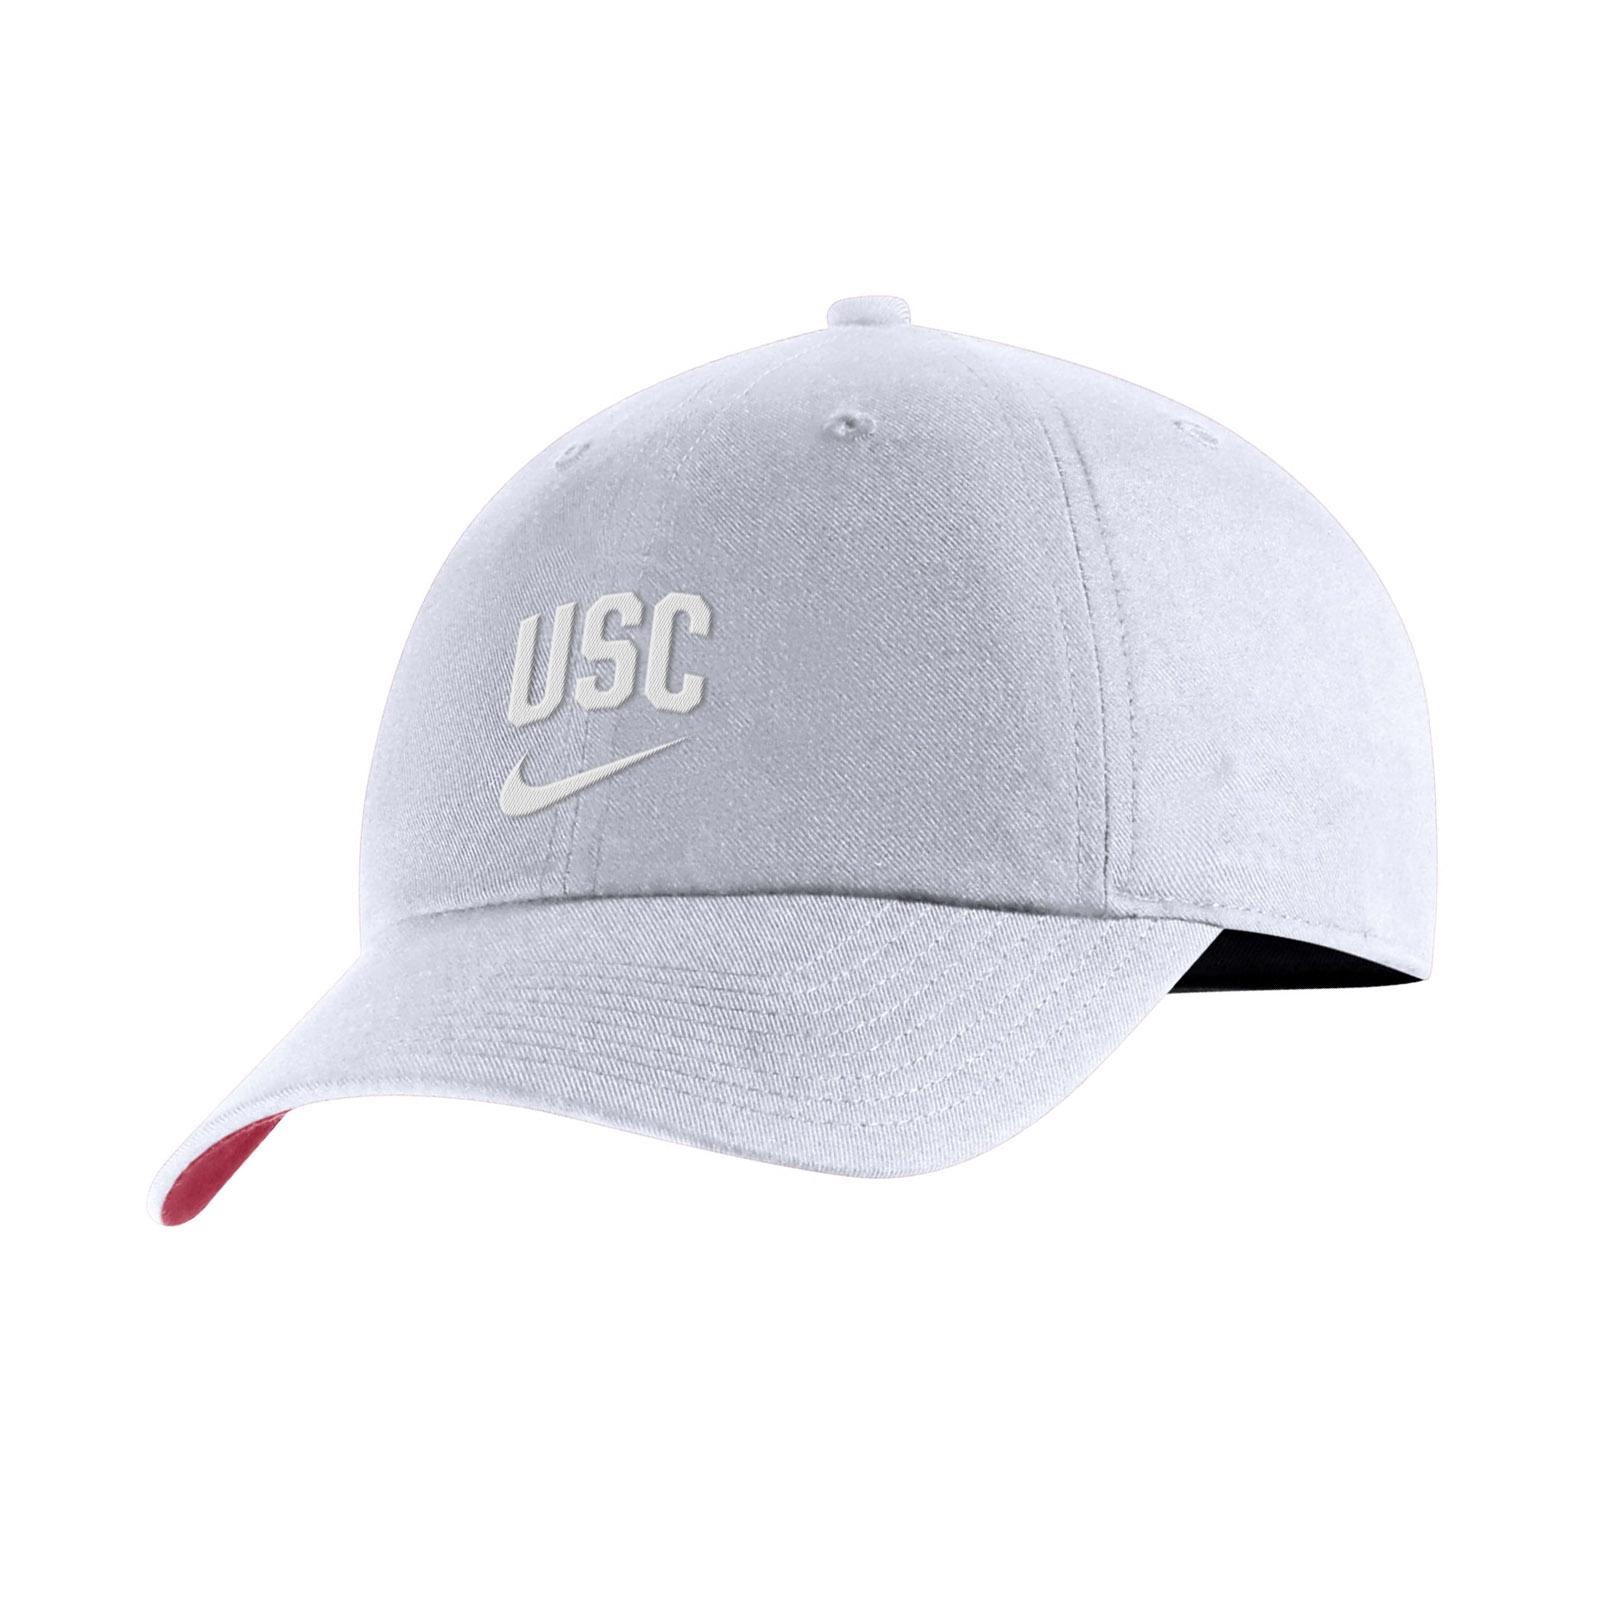 USC Arch H86 Adjustable Hat White Tonal by BCS Nike image01